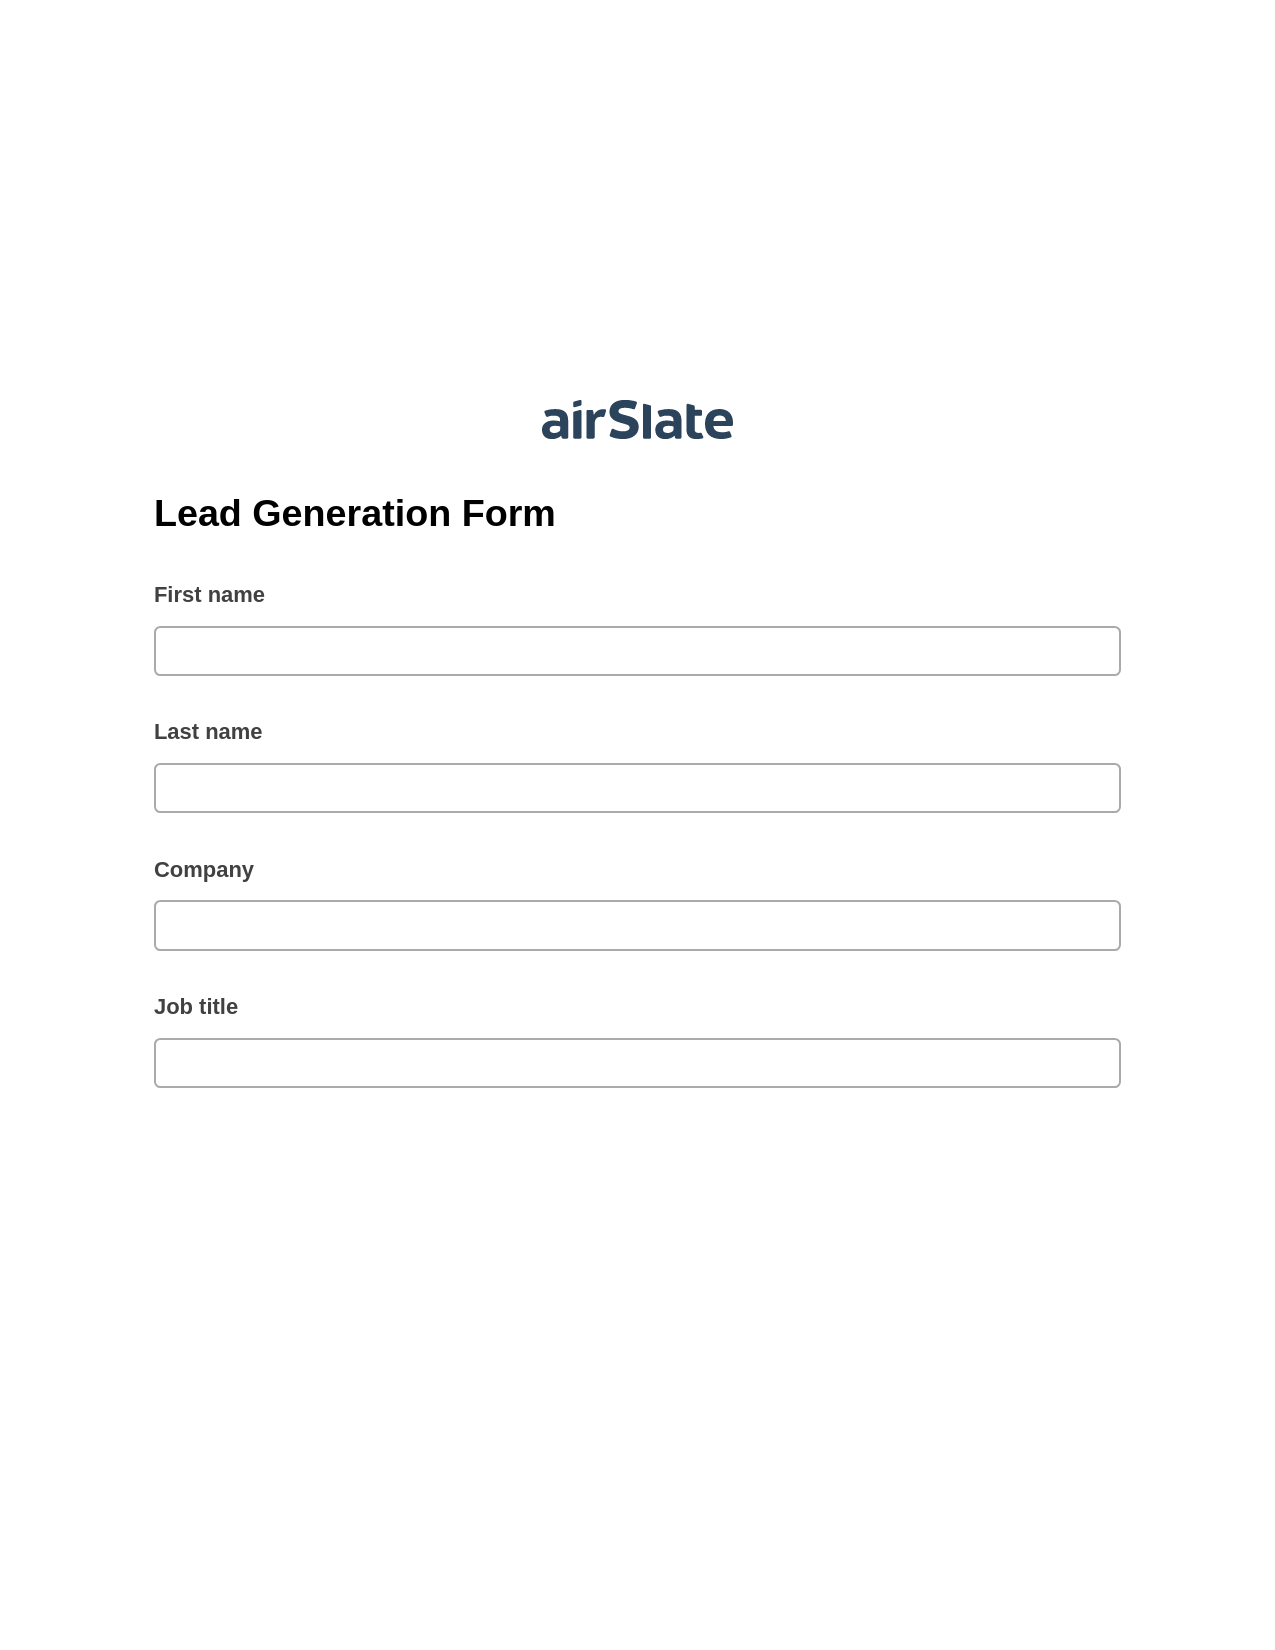 Lead Generation Form Pre-fill from Salesforce Records Bot, Remove Slate Bot, Export to MySQL Bot